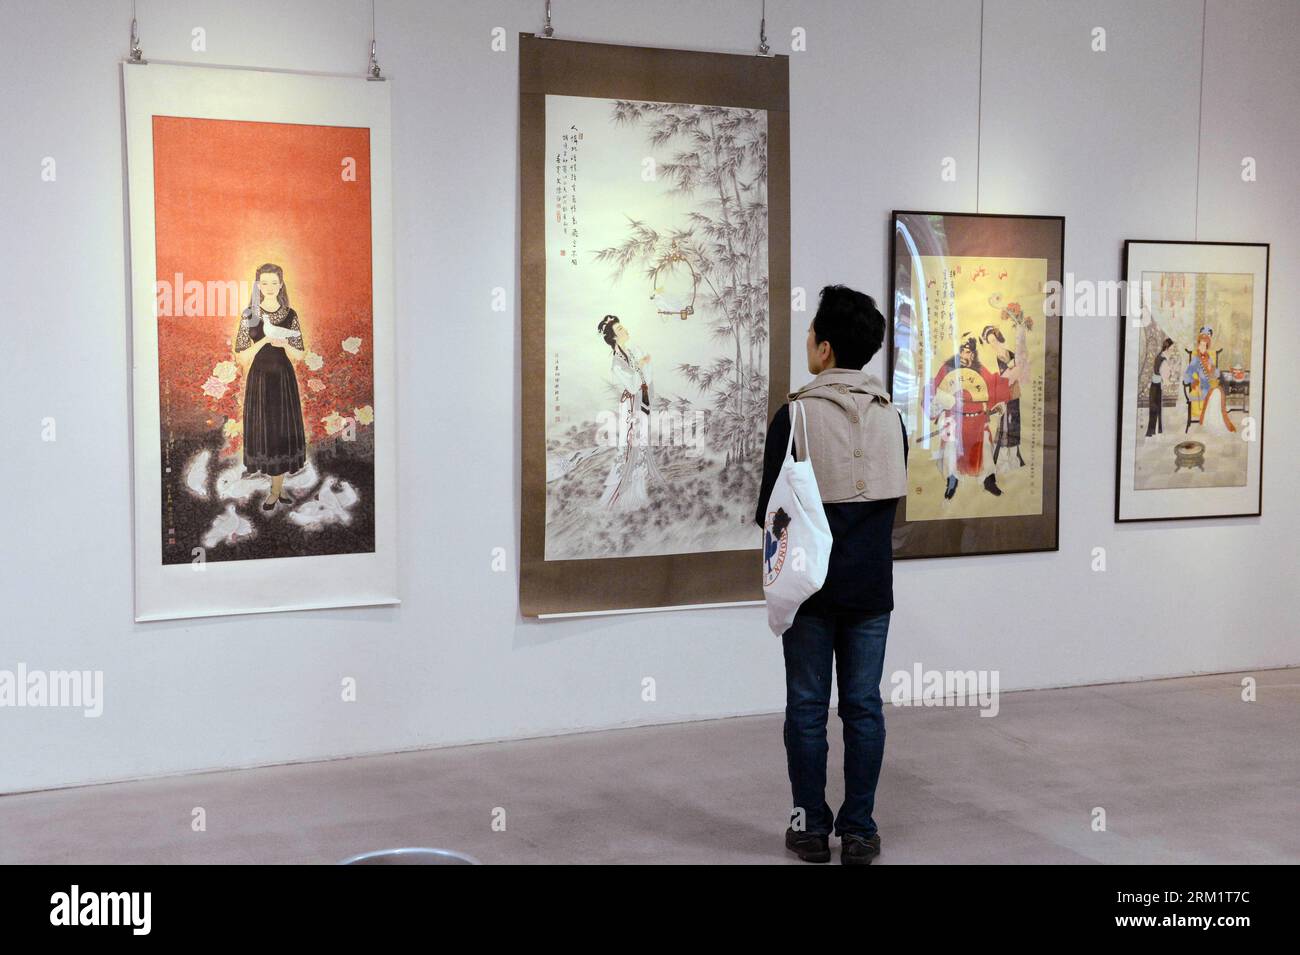 Bildnummer: 59626277  Datum: 10.05.2013  Copyright: imago/Xinhua (130510) -- TOKYO, May 10, 2013 (Xinhua) -- A visitor looks at paintings in the Yuan Xiang Traditional Chinese Realistic Painting Exhibition at the Ueno Royal Museum in Tokyo, Japan, May 10, 2013. Yuan Xiang brought more than 20 traditional Chinese realistic paintings to his exhibition at the Ueno Royal Museum. (Xinhua/Ma Ping)(zhf) JAPAN-TOKYO-CHINESE PAINTING-EXHIBITION PUBLICATIONxNOTxINxCHN Kulst Kunst xas x0x 2013 quer      59626277 Date 10 05 2013 Copyright Imago XINHUA  Tokyo May 10 2013 XINHUA a Visitor Looks AT Paintings Stock Photo